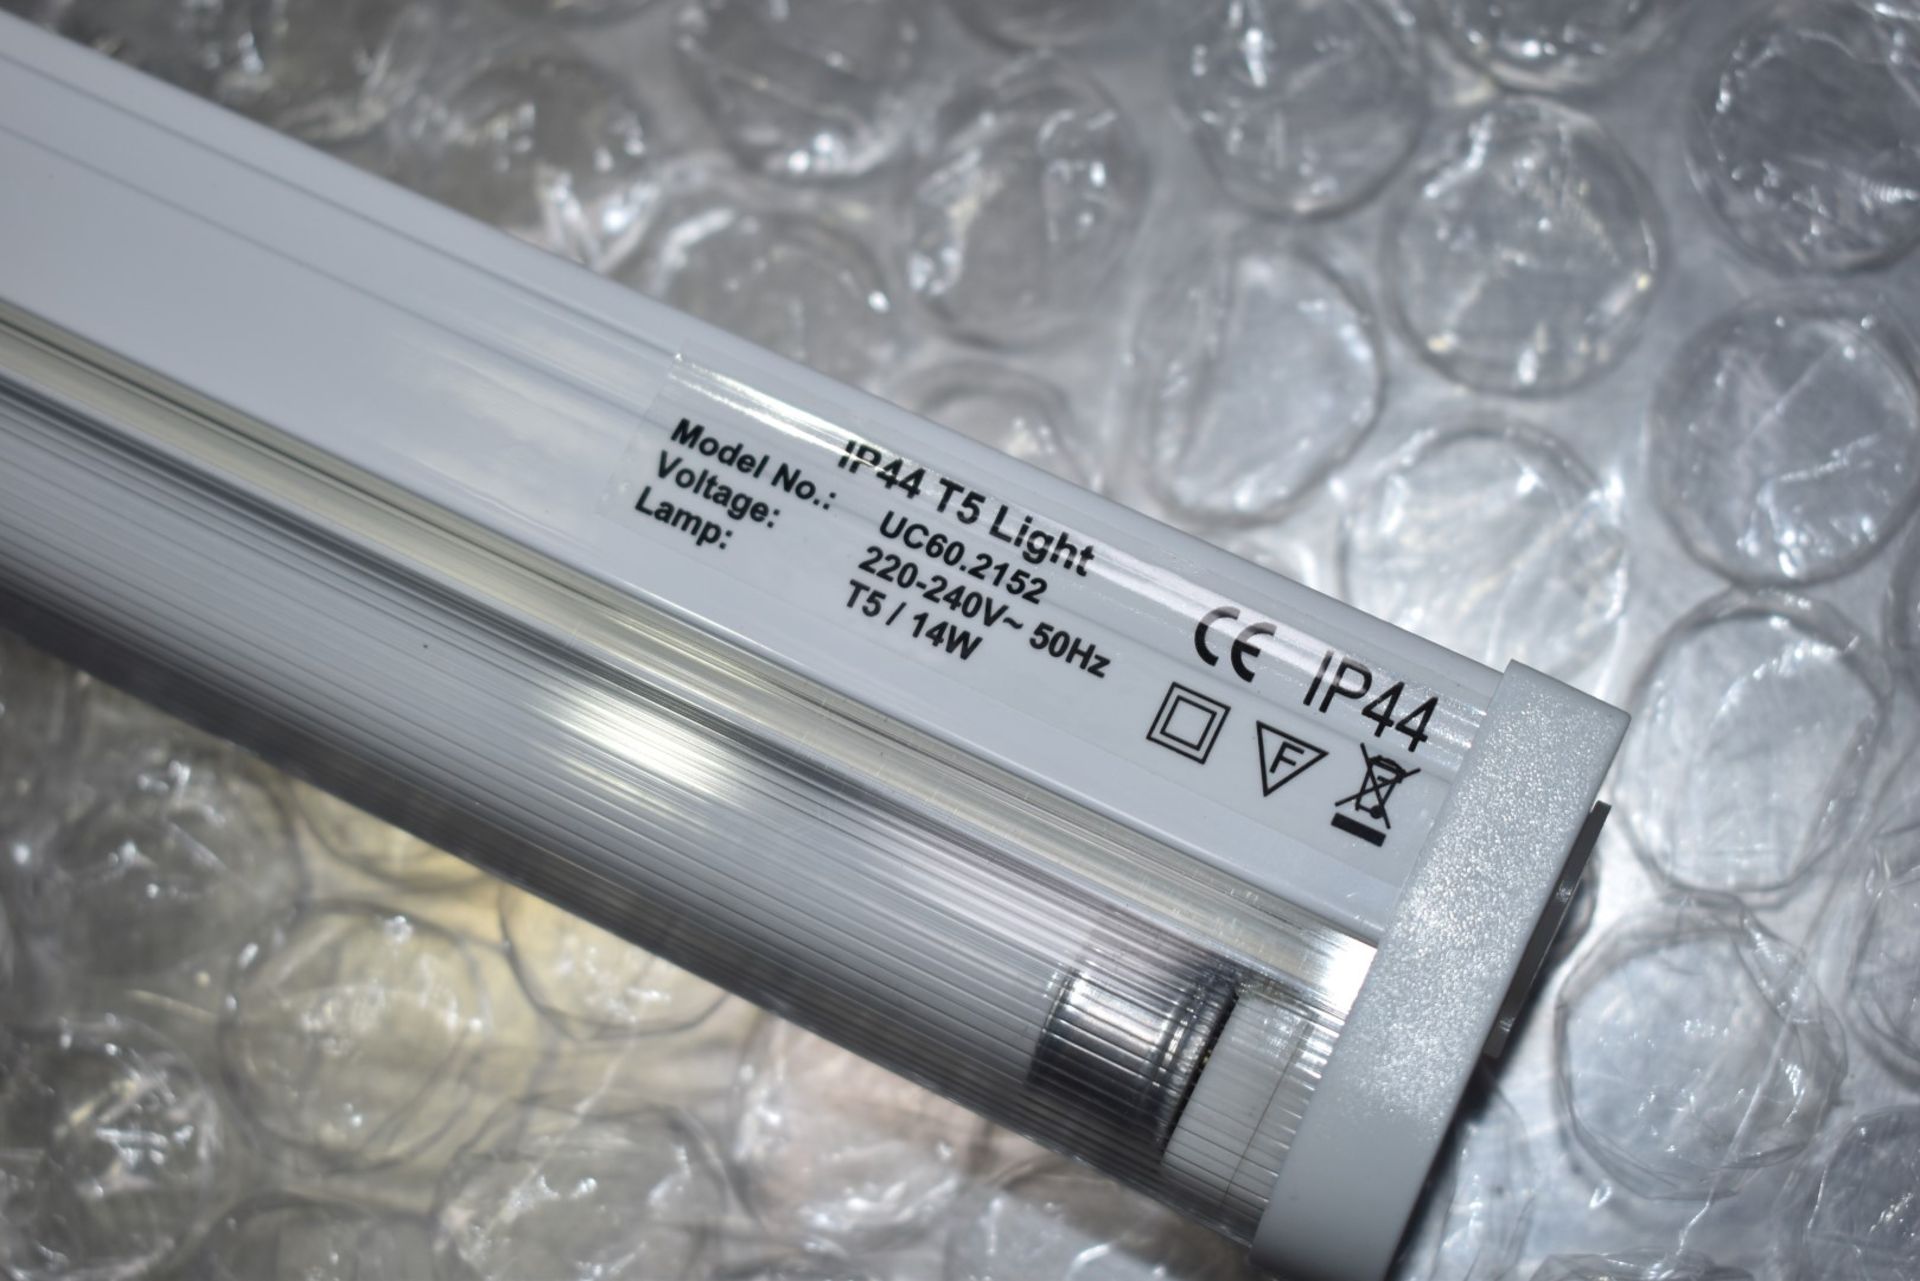 4 x Bathroom Light Fittings - IP44 Waterproof T5 14w Fluorescent Lights With Built-In Electronic - Image 11 of 11